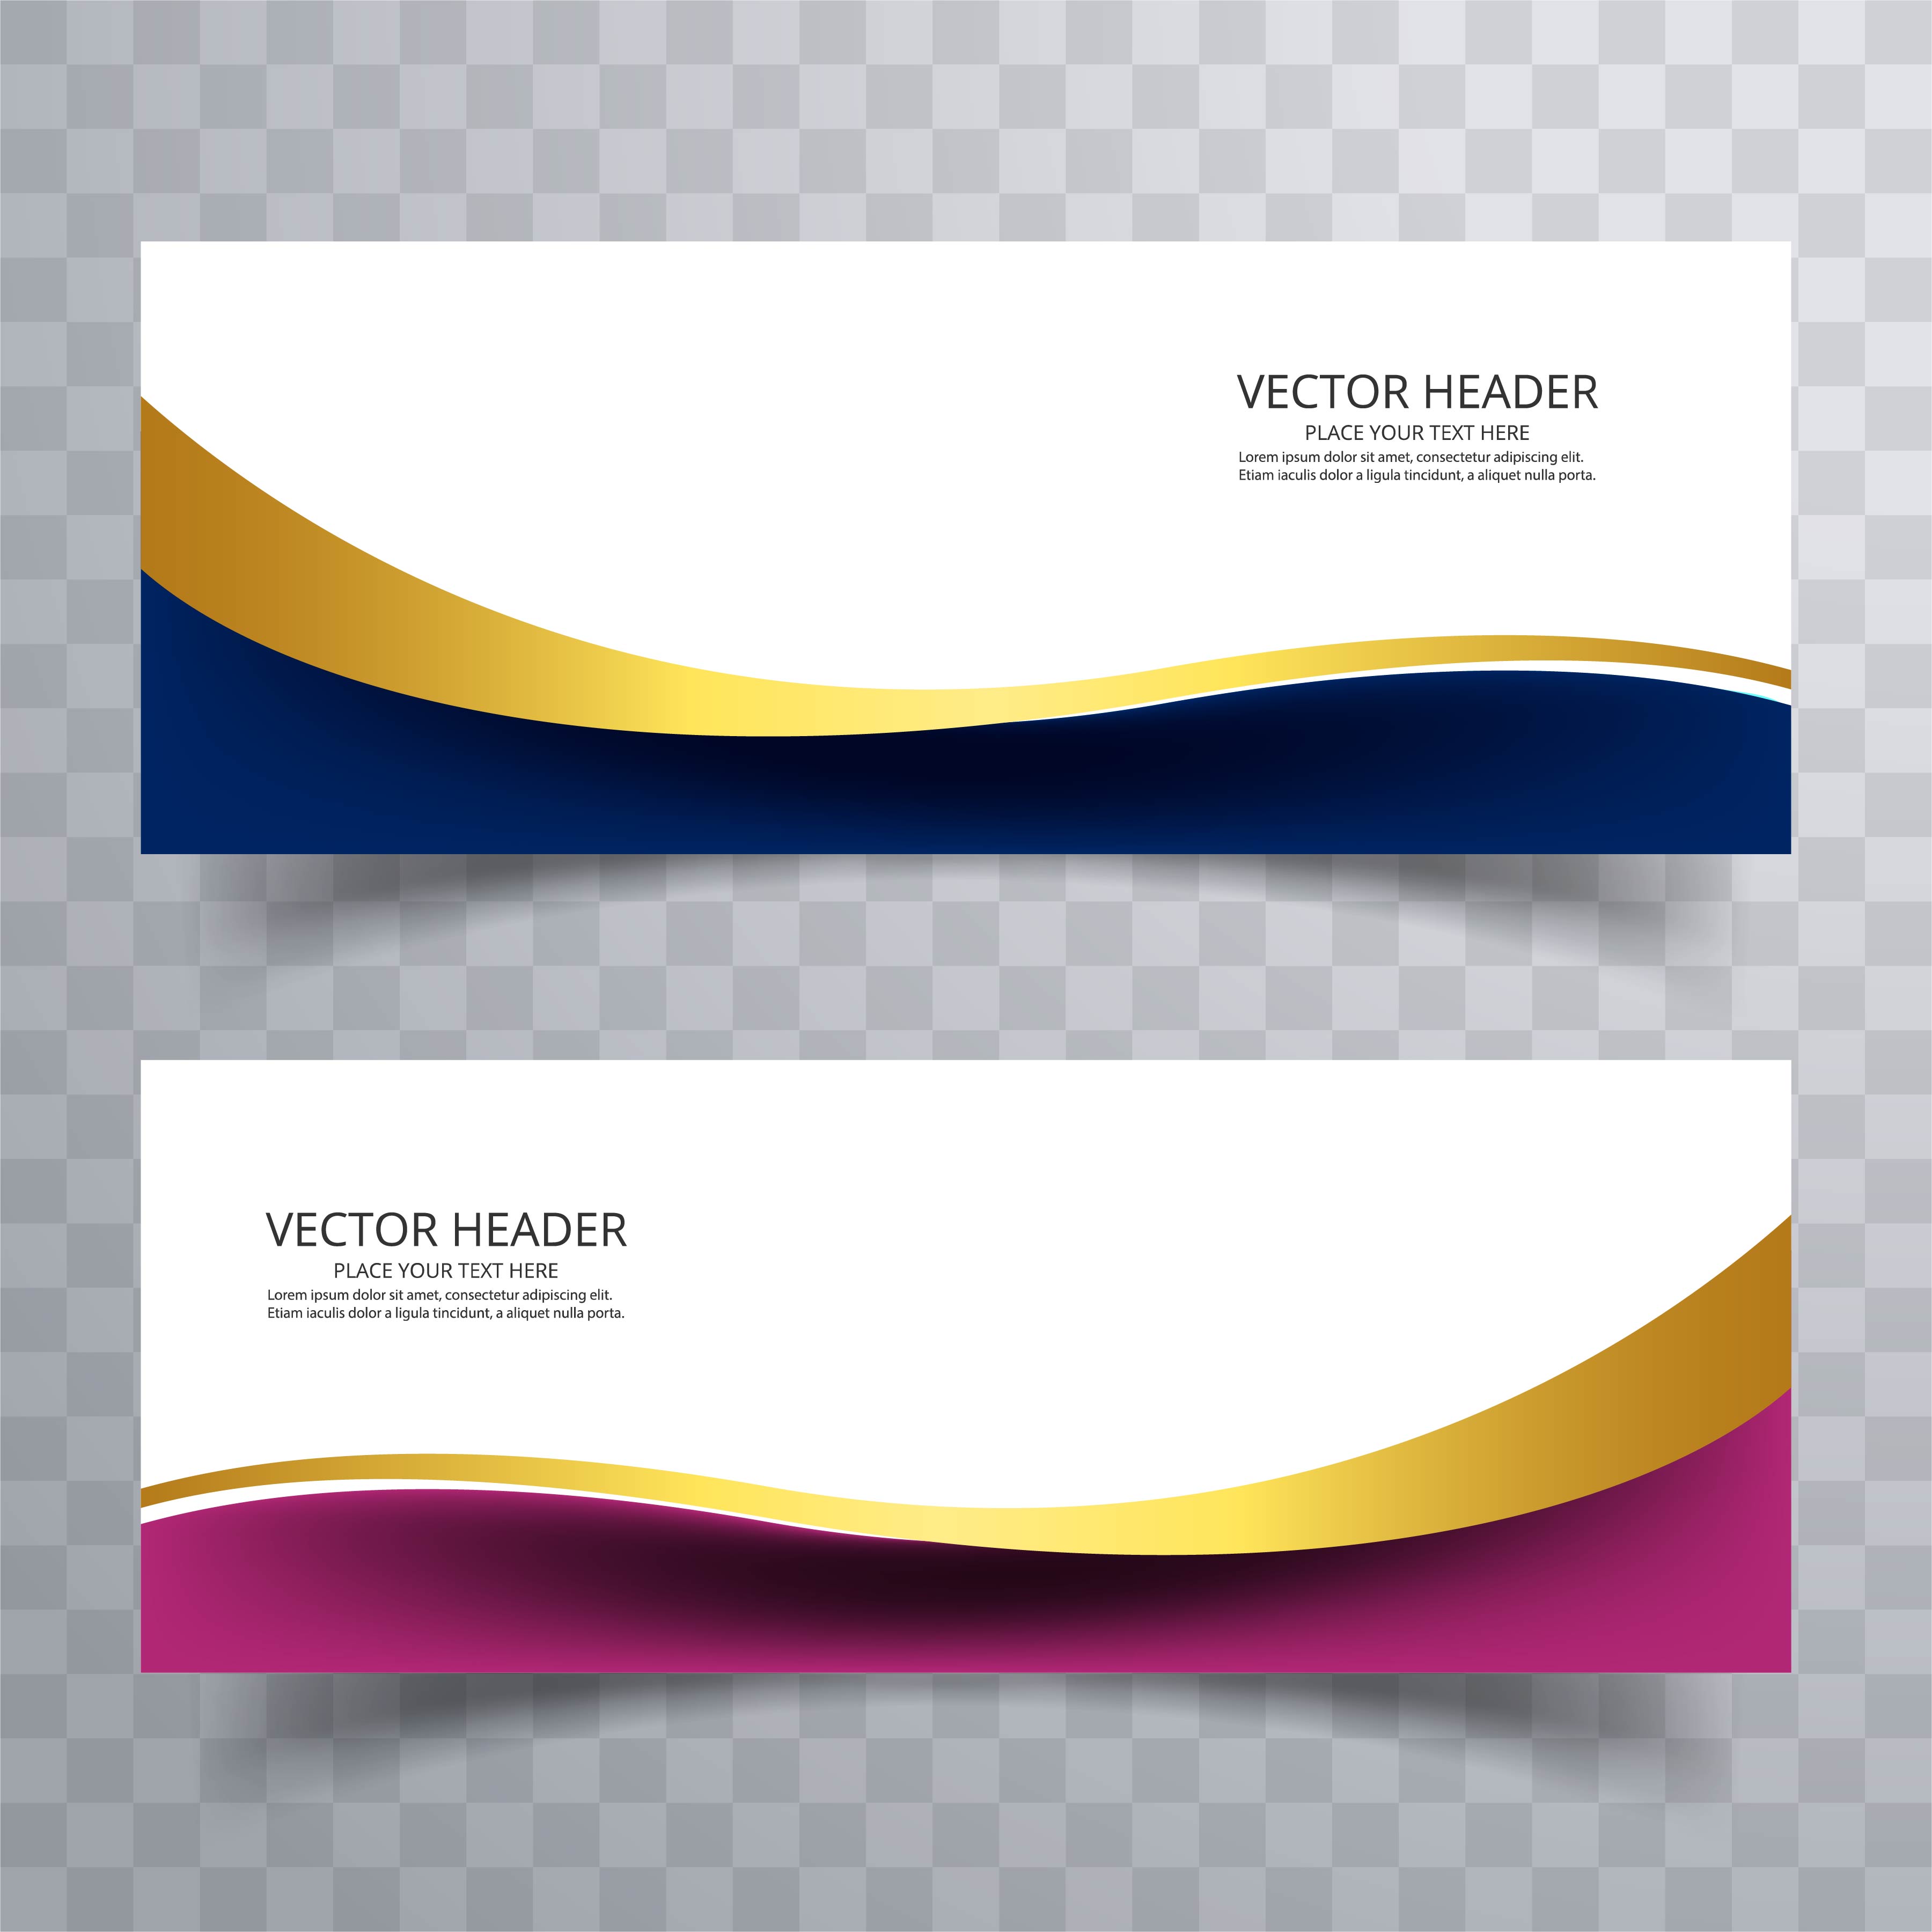 abstract-web-banner-design-background-or-header-templates-with-w-245073